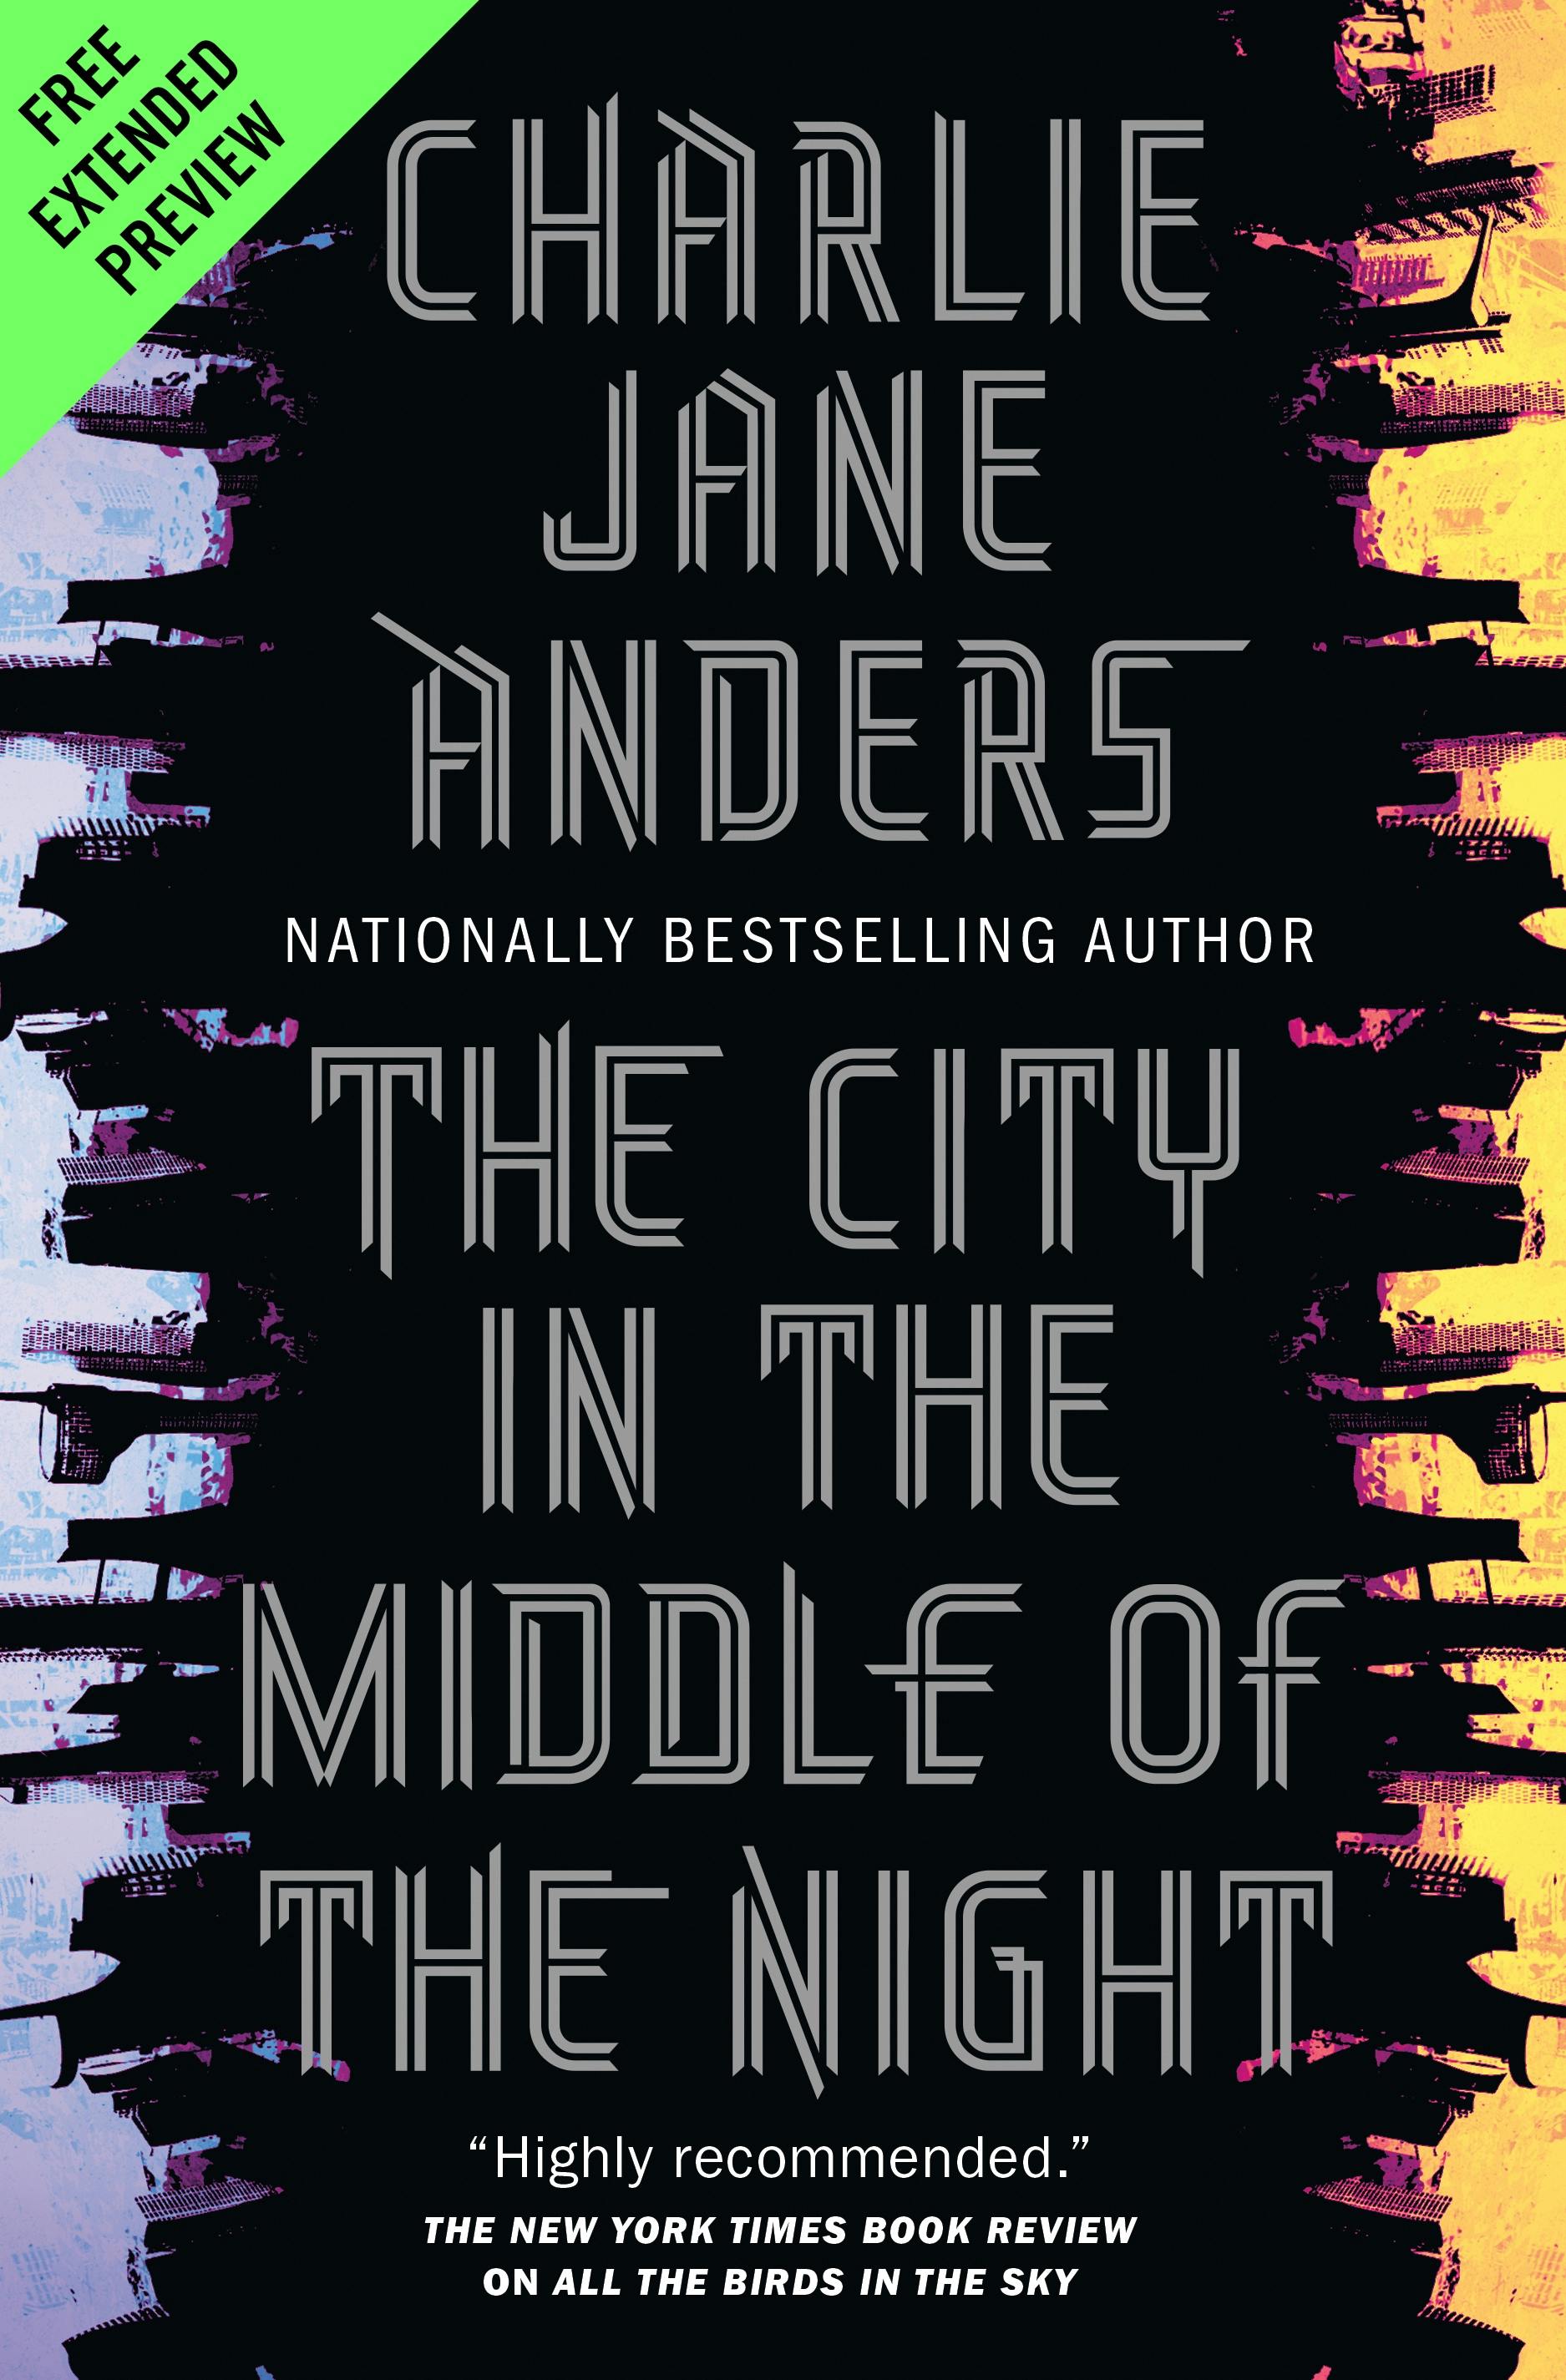 Cover for the book titled as: The City in the Middle of the Night Sneak Peek